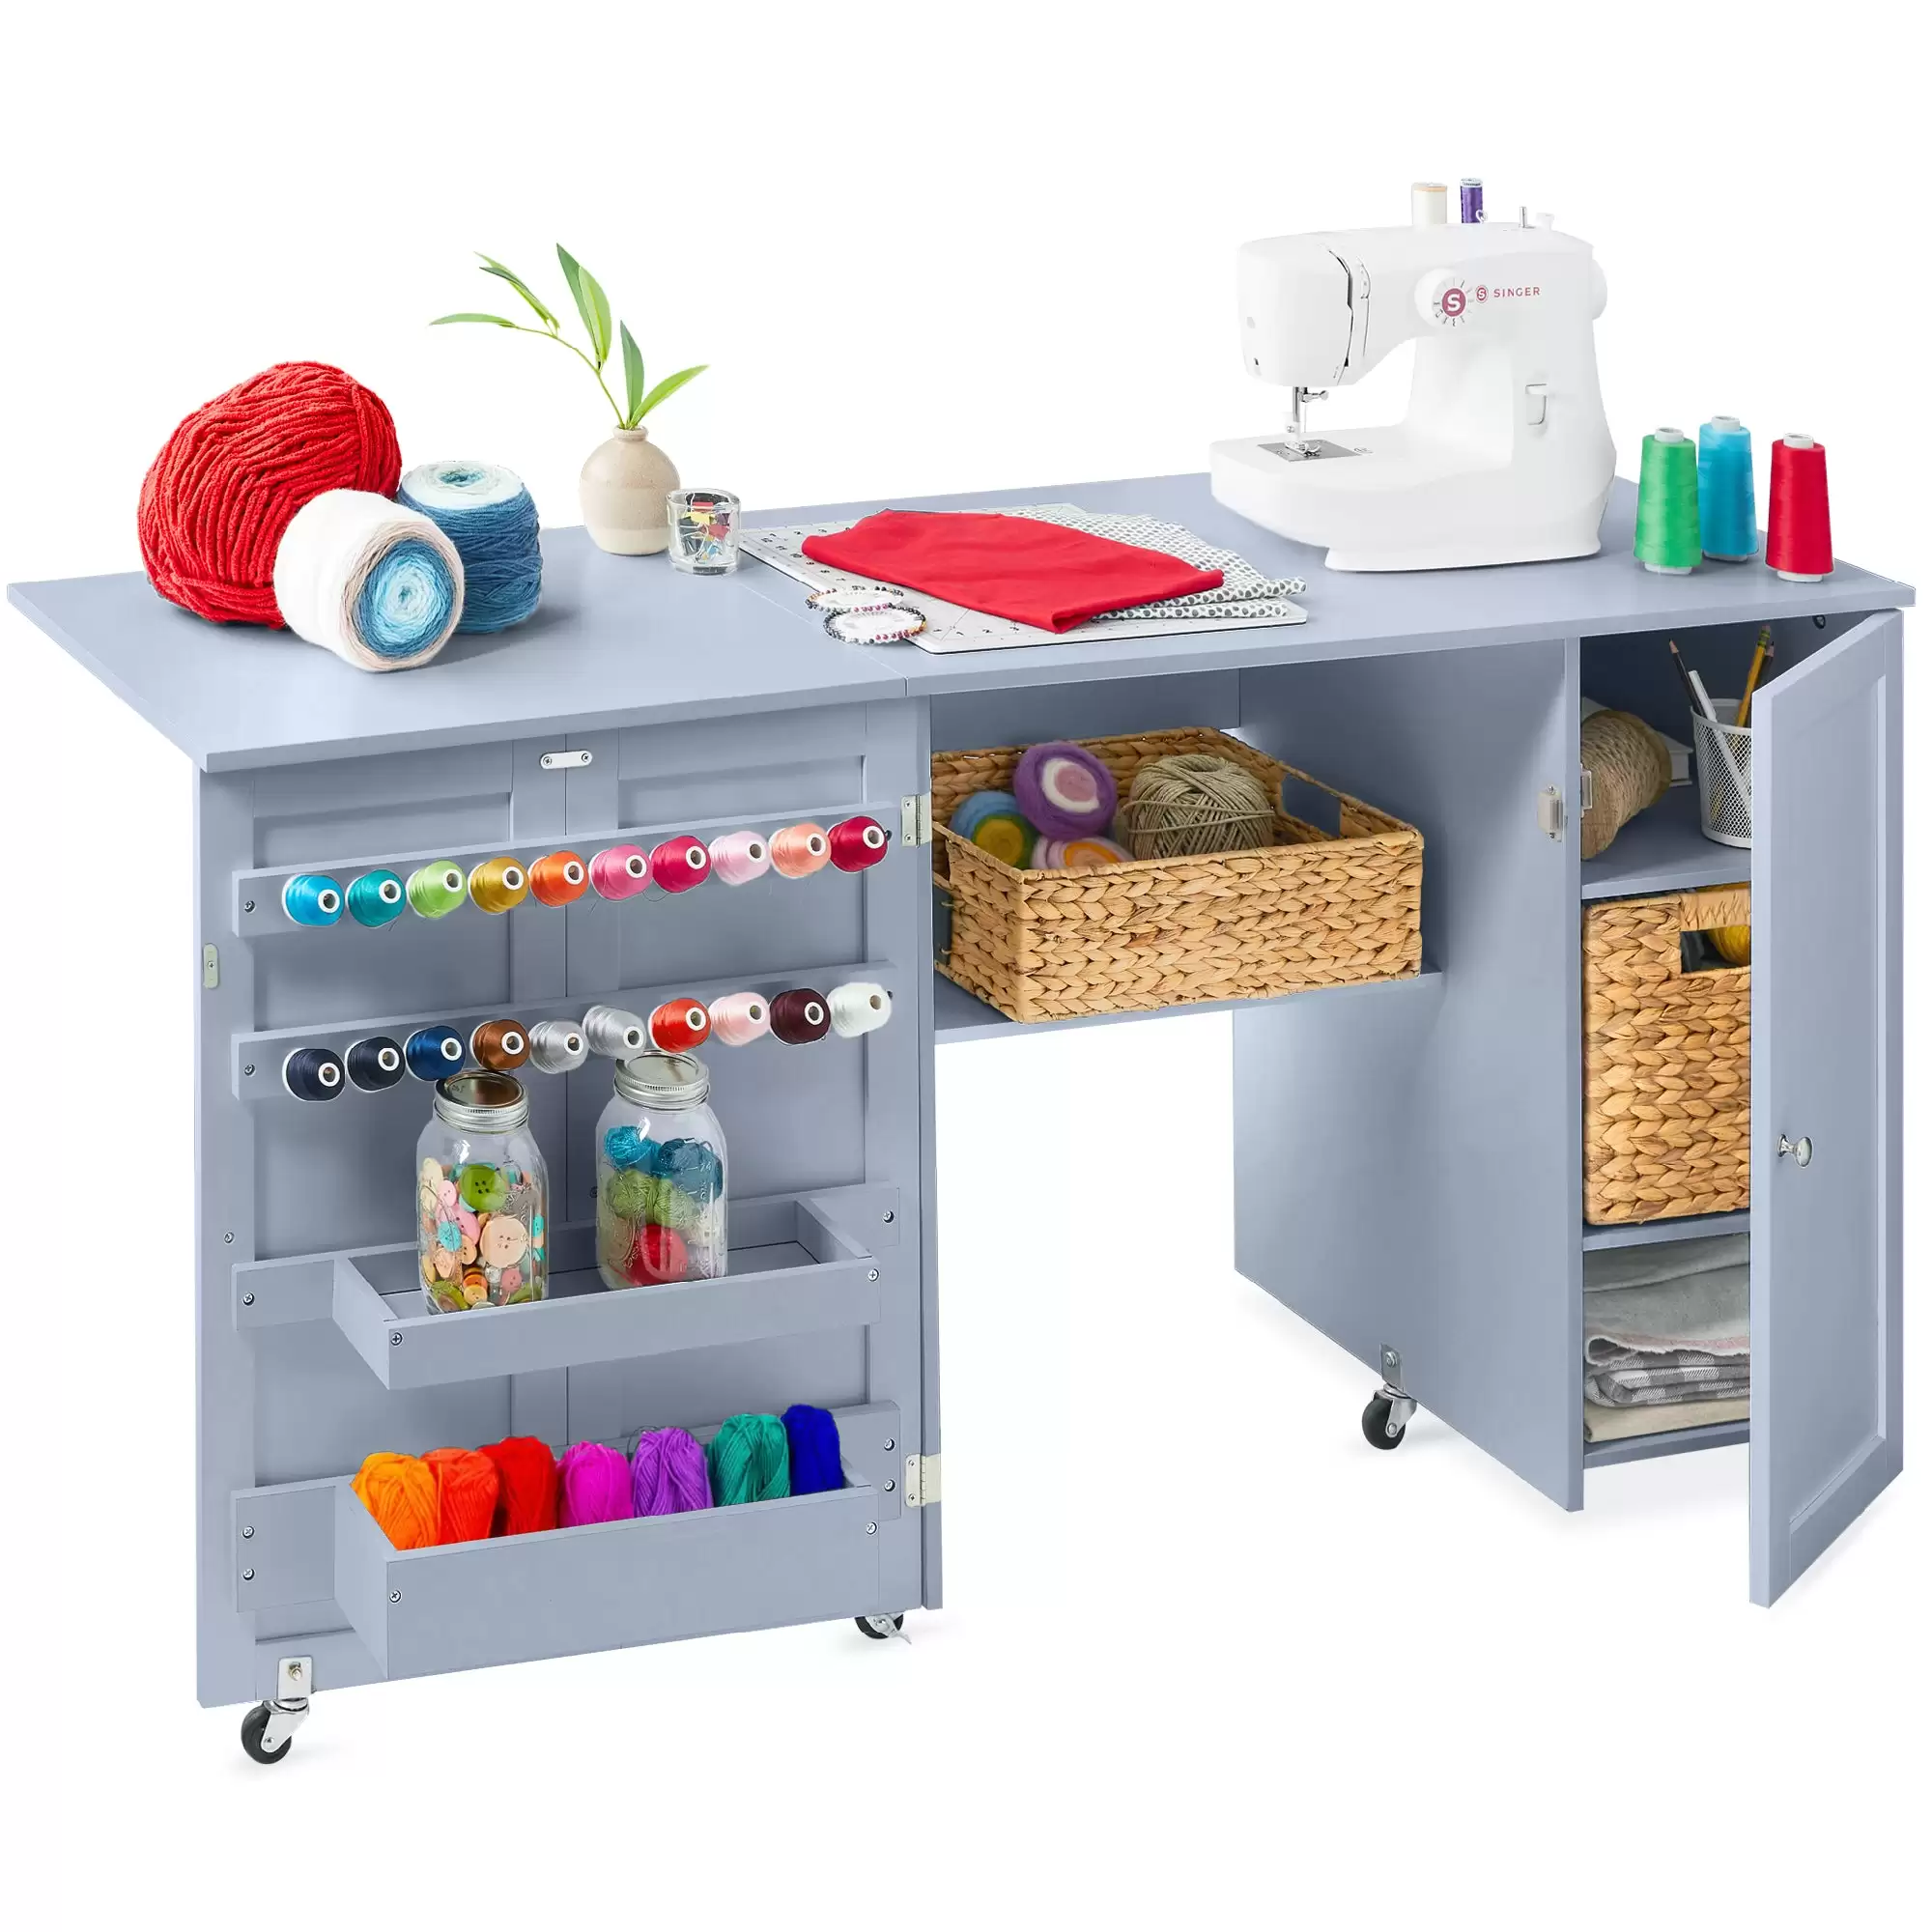 Pay $139.99 Large Portable Folding Sewing Table Multipurpose Craft Station W/ Wheels With This Bestchoiceproducts Coupon